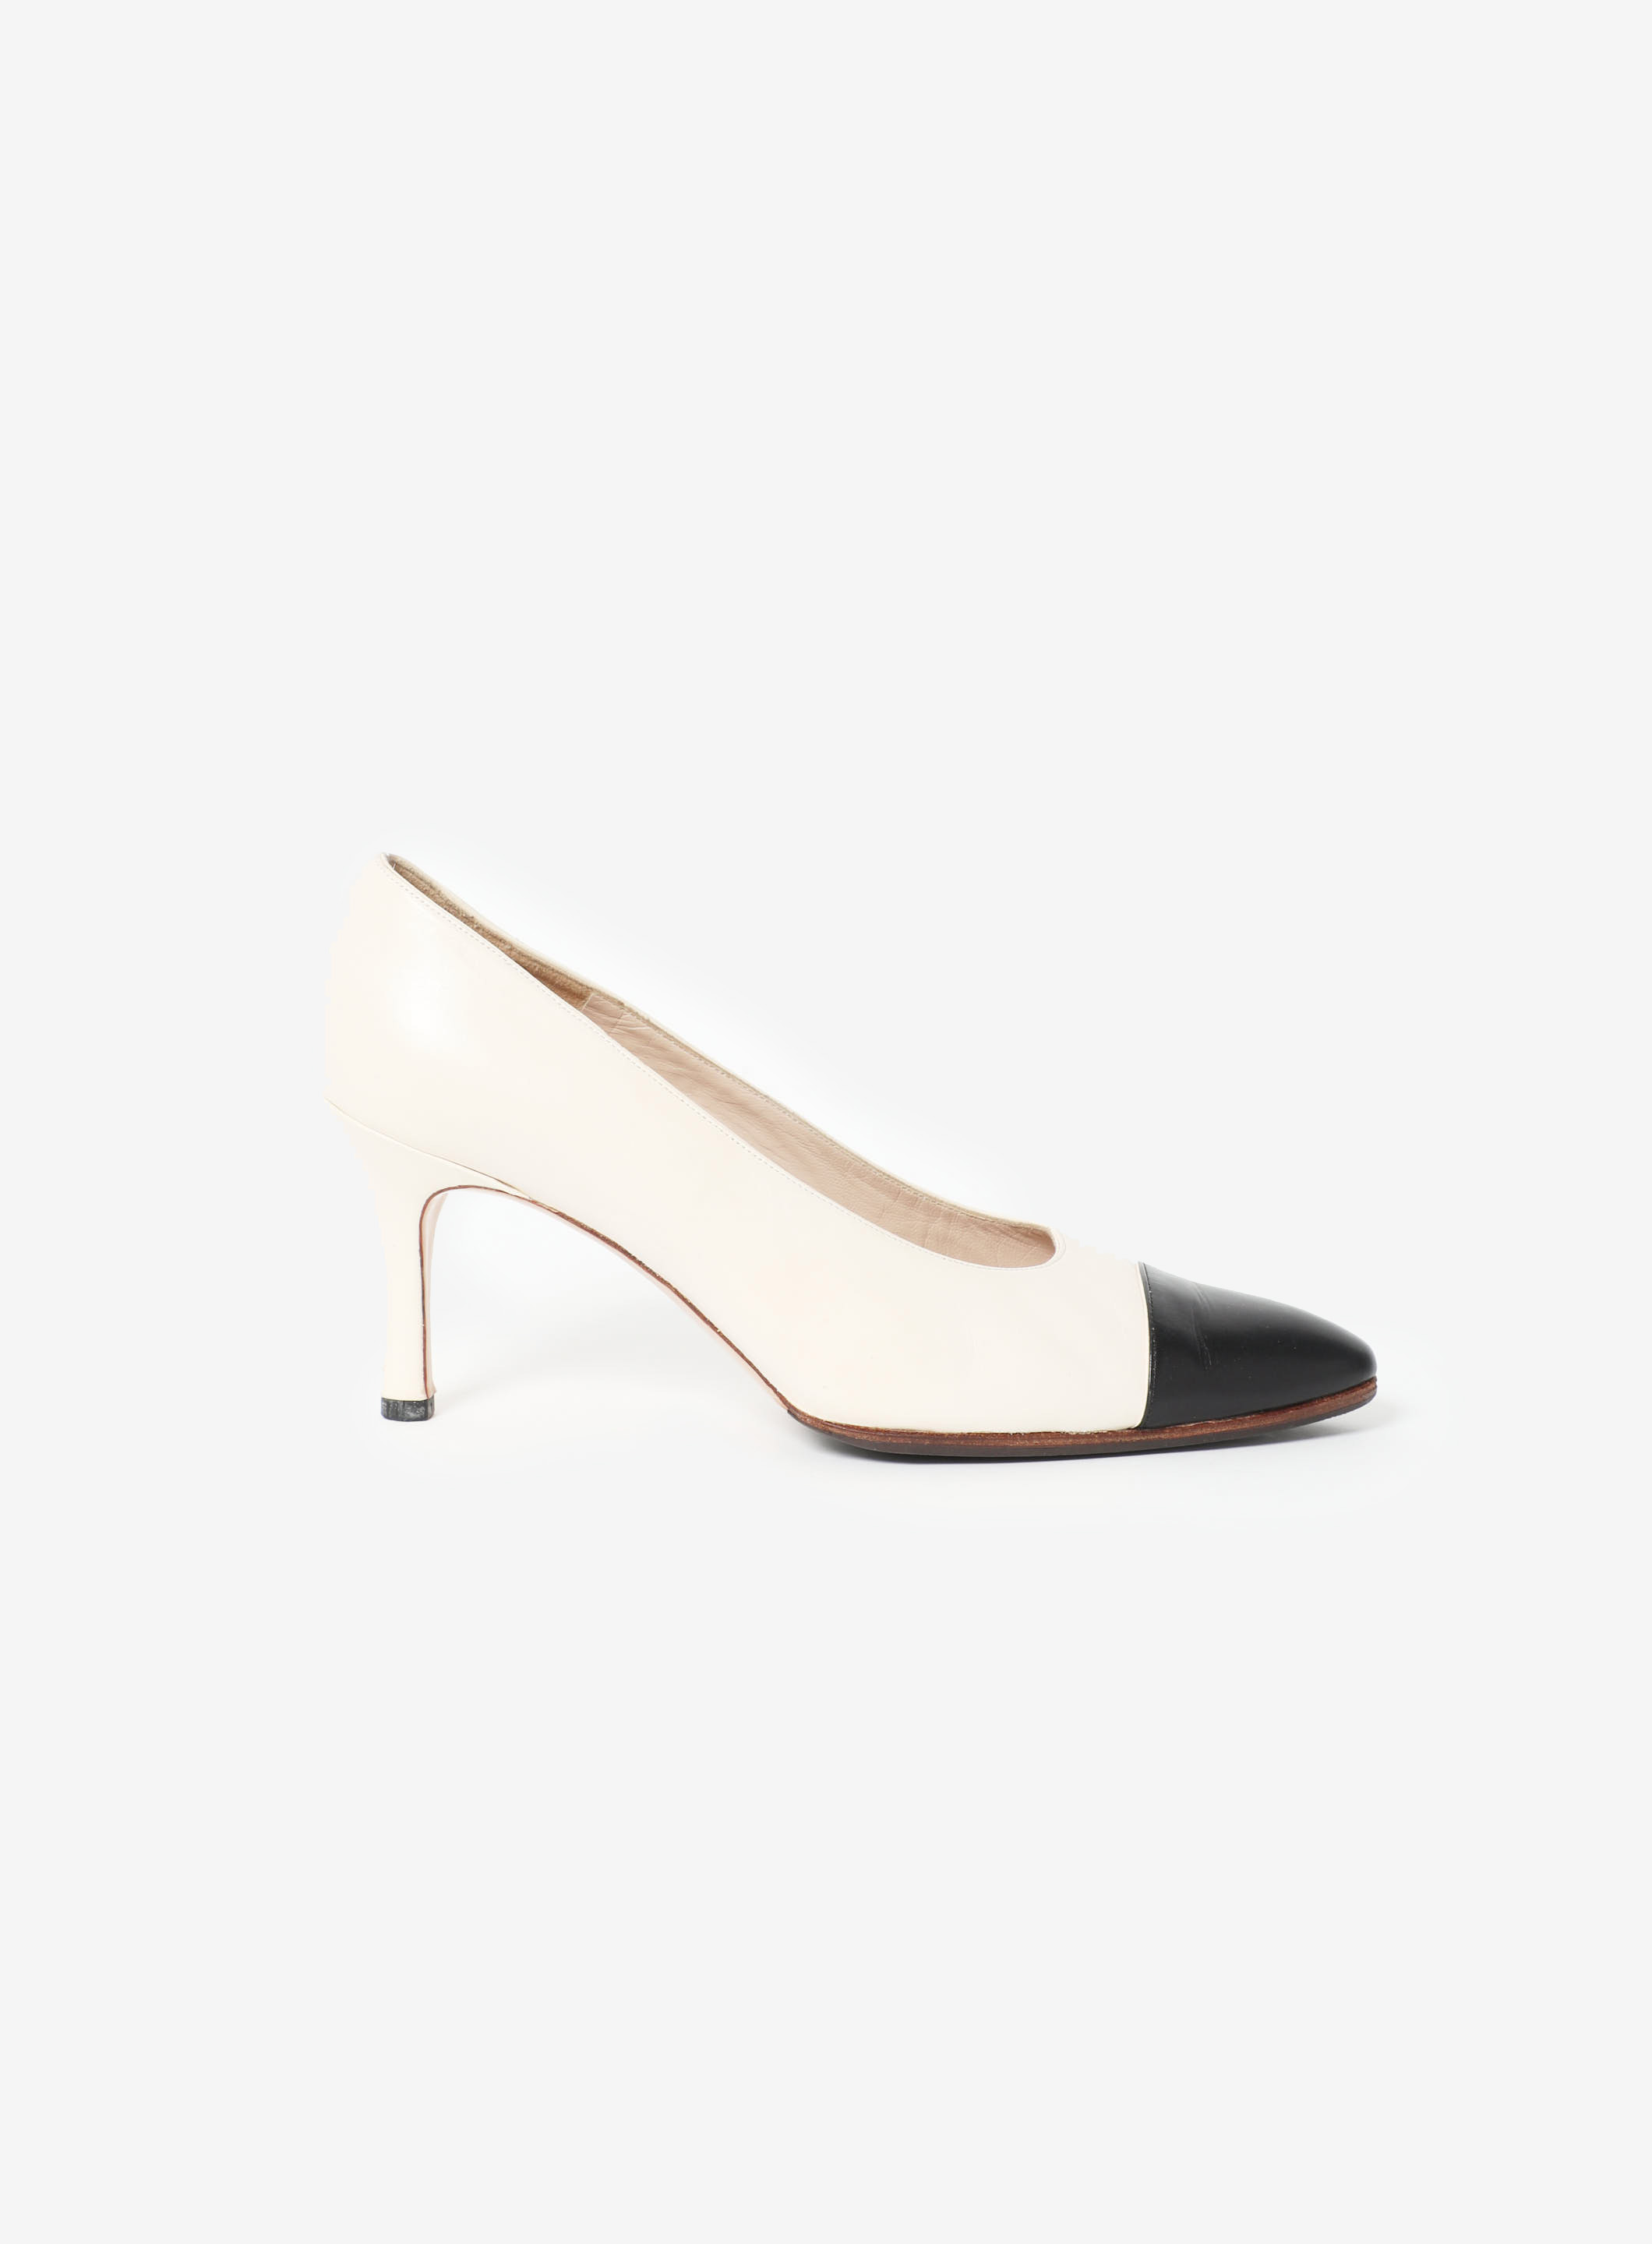 Chanel White/Black Canvas and Tweed CC Slingback Block Heel Pumps